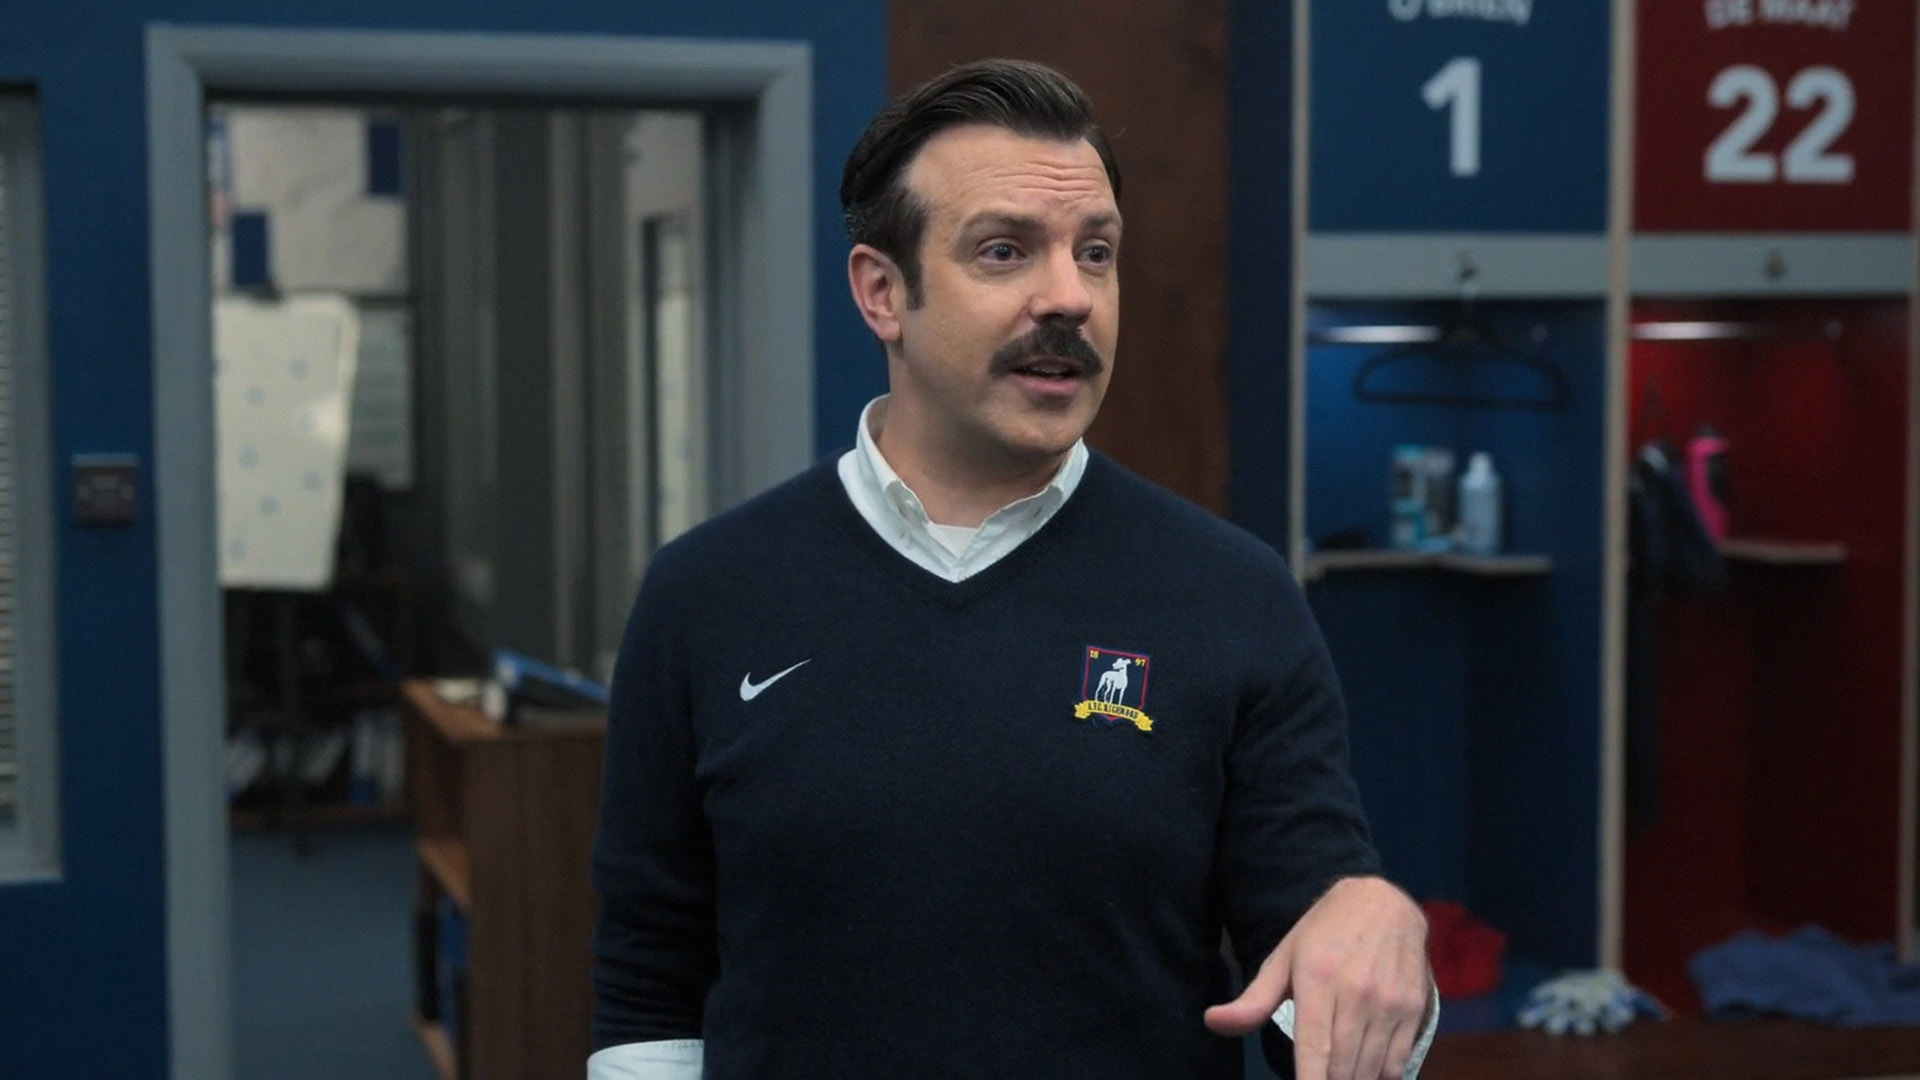 Did Apple TV Just Tease a Future Ted Lasso Spinoff Happening?